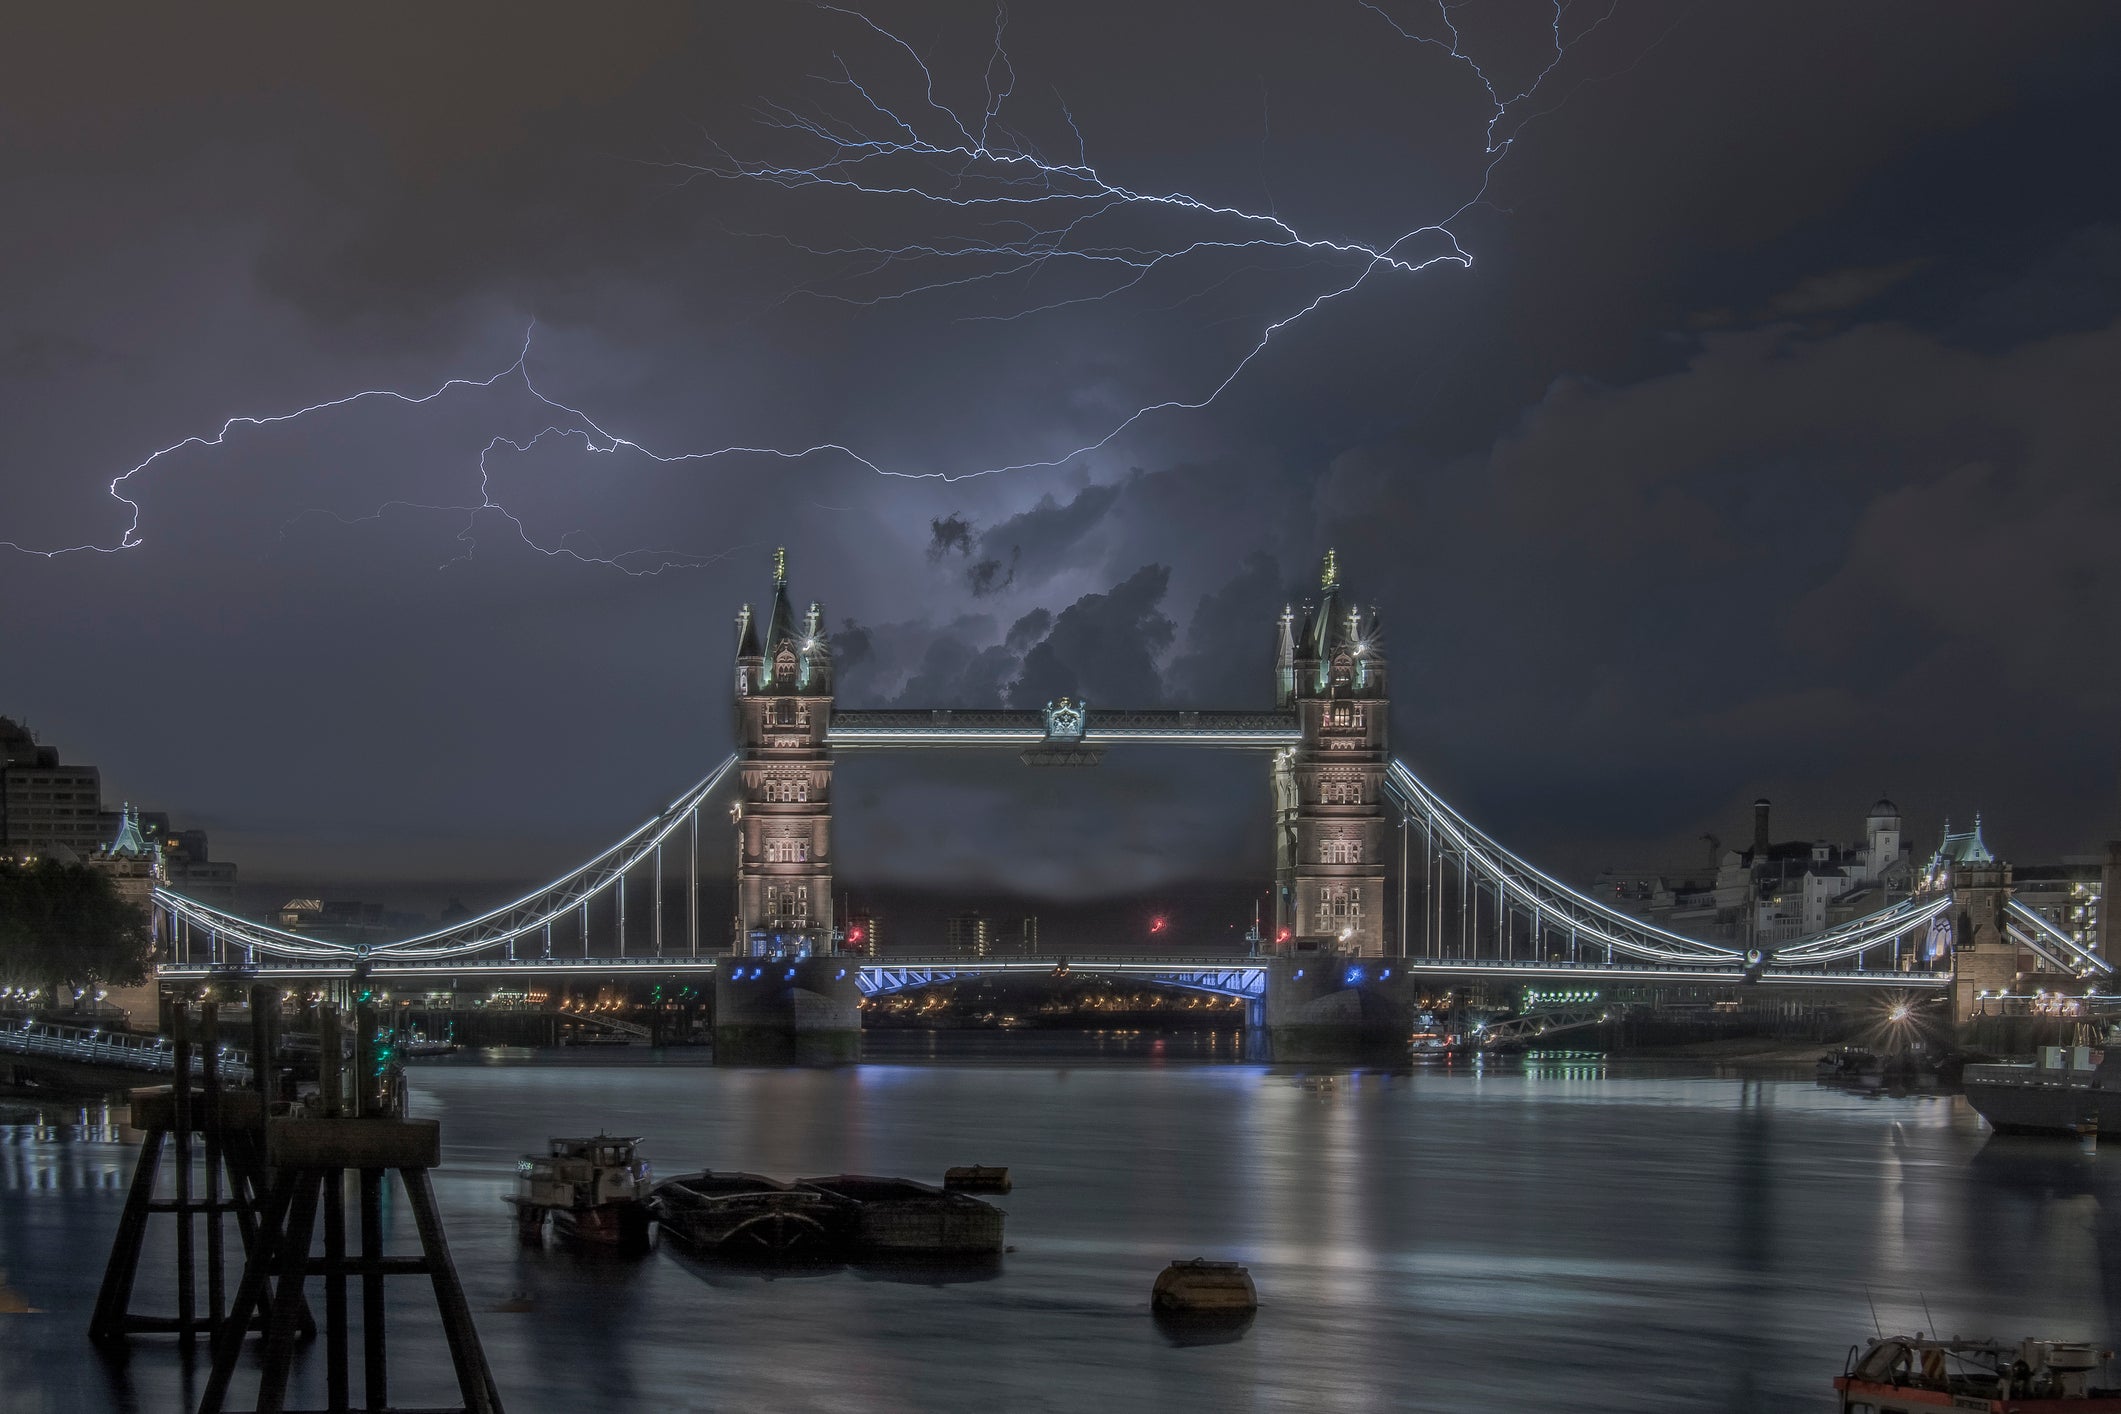 Heavy weather over London and UK